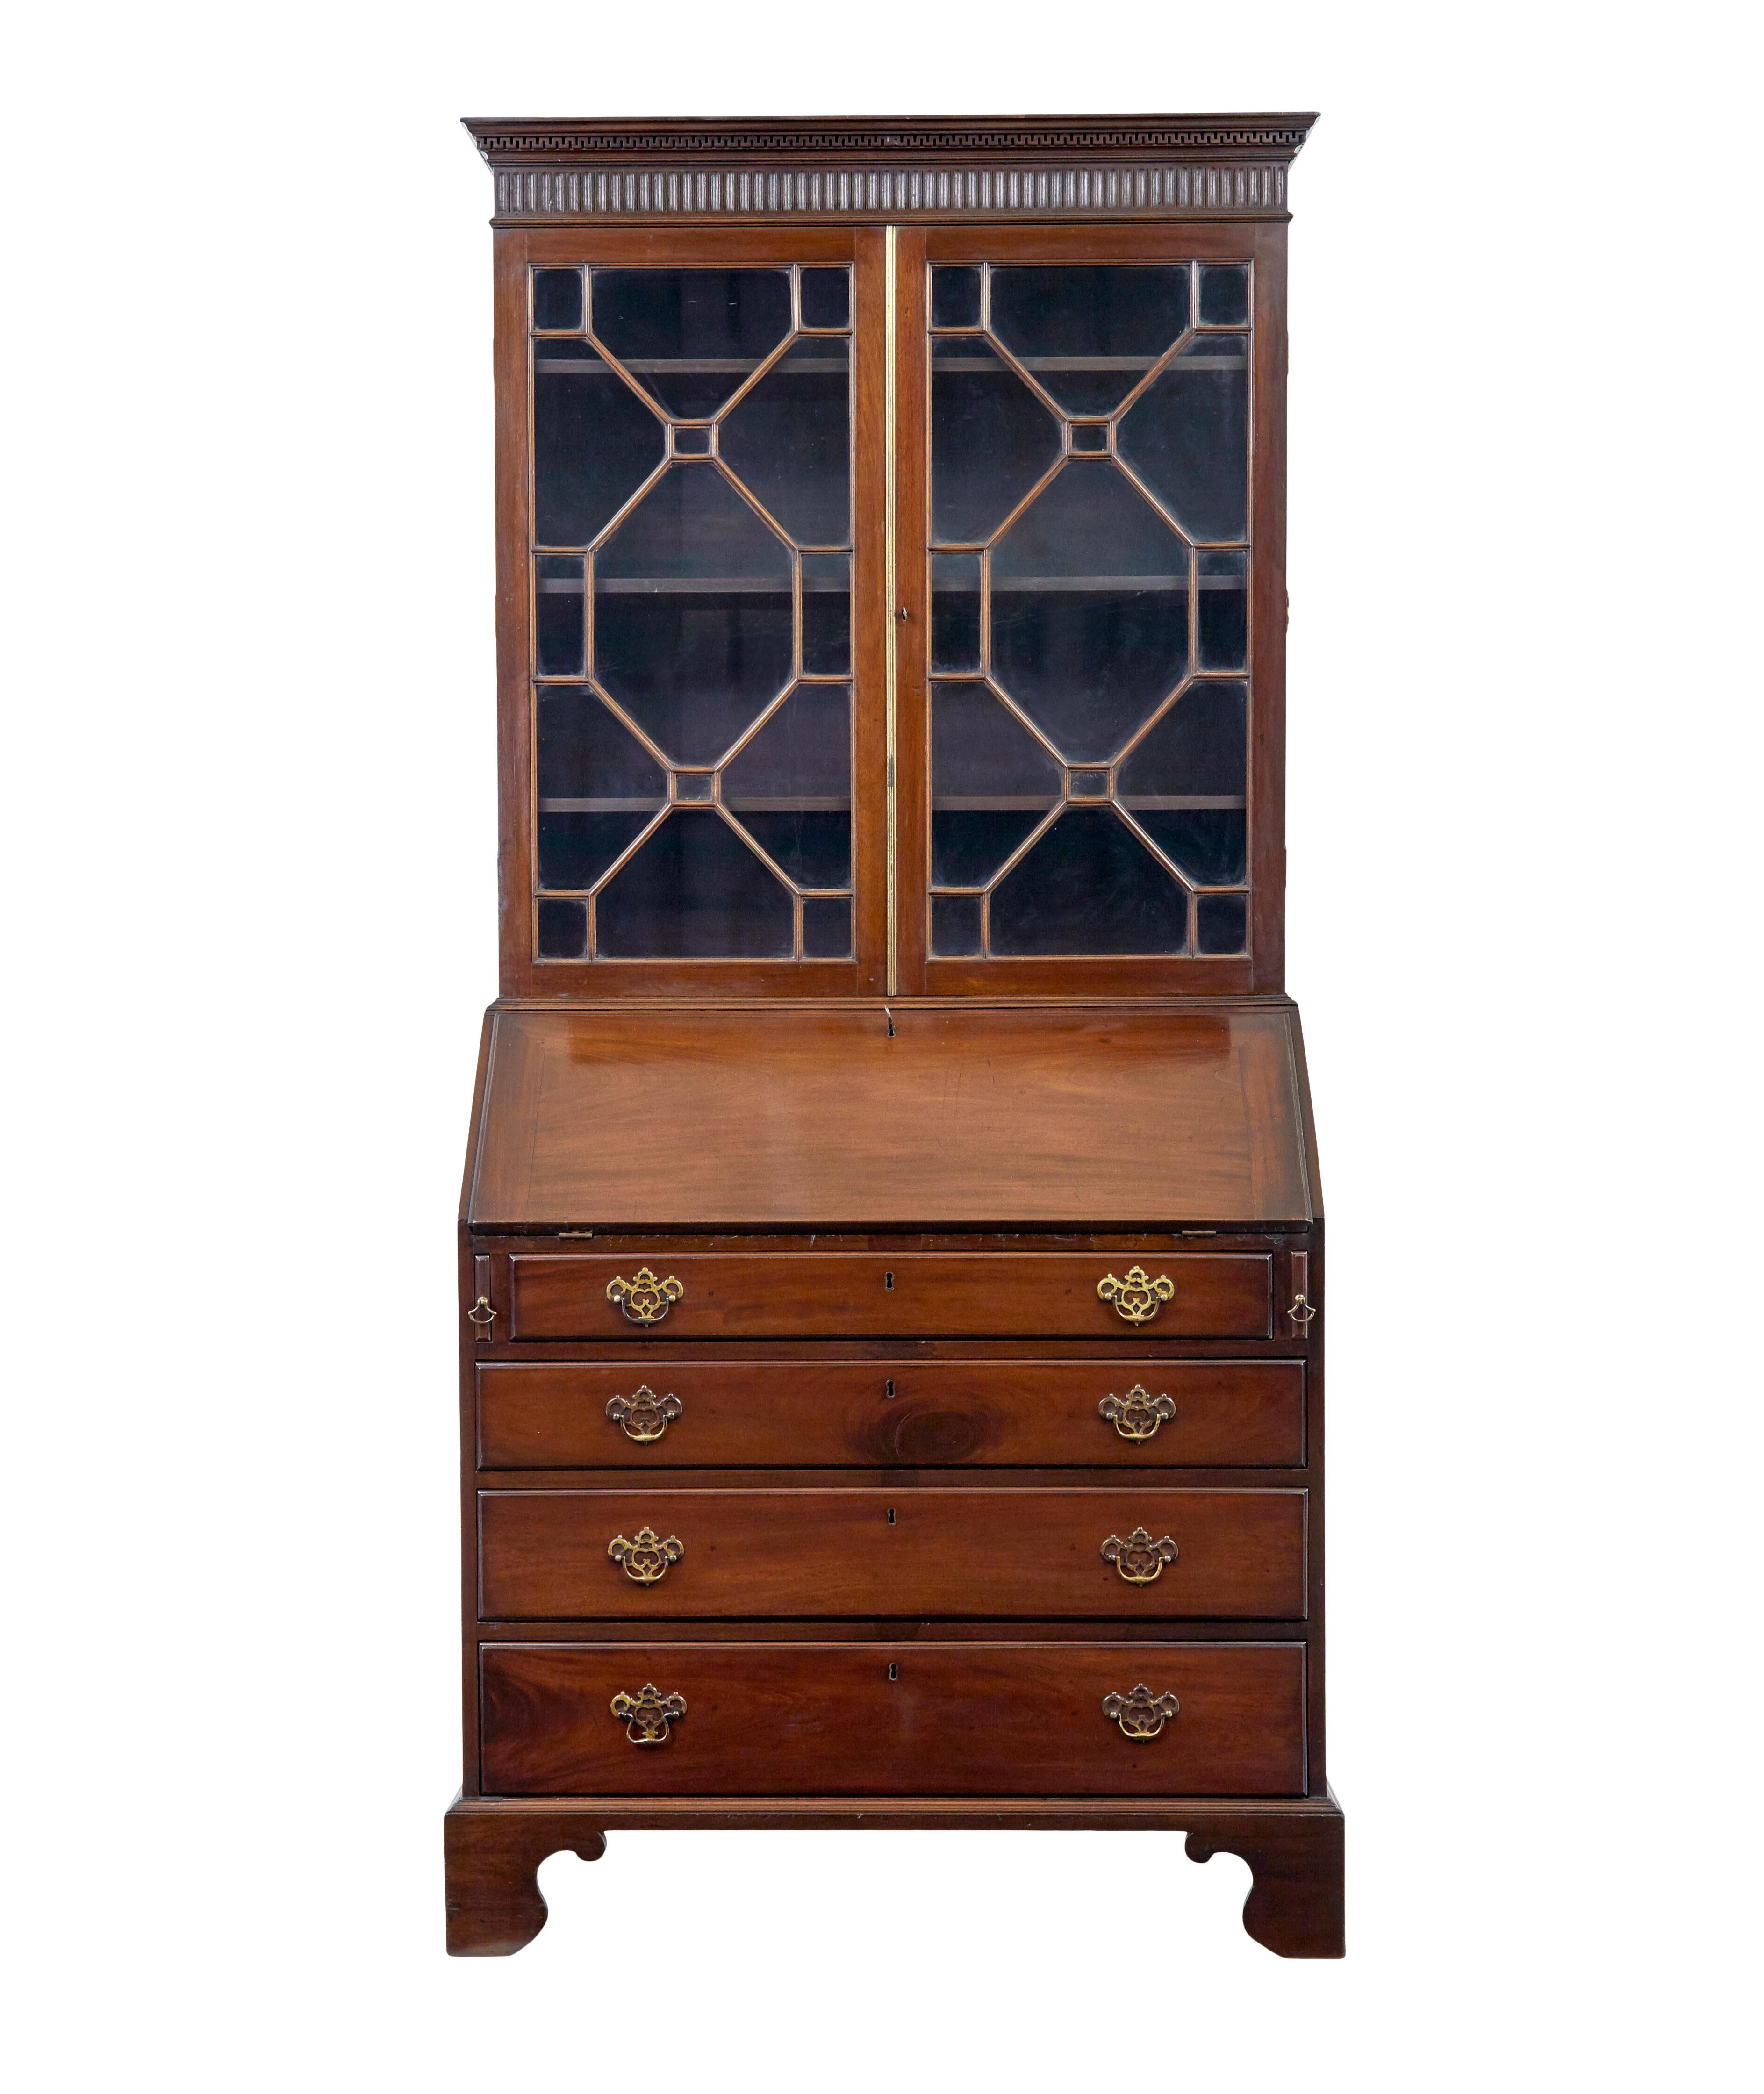 Early 19th century mahogany bureau bookcase circa 1810.

Good quality late Georgian astral glazed 2 part bureau bookcase.

Top bookcase section with a carved dentil freize cornice, below which the astral glazed double doors open to reveal 3